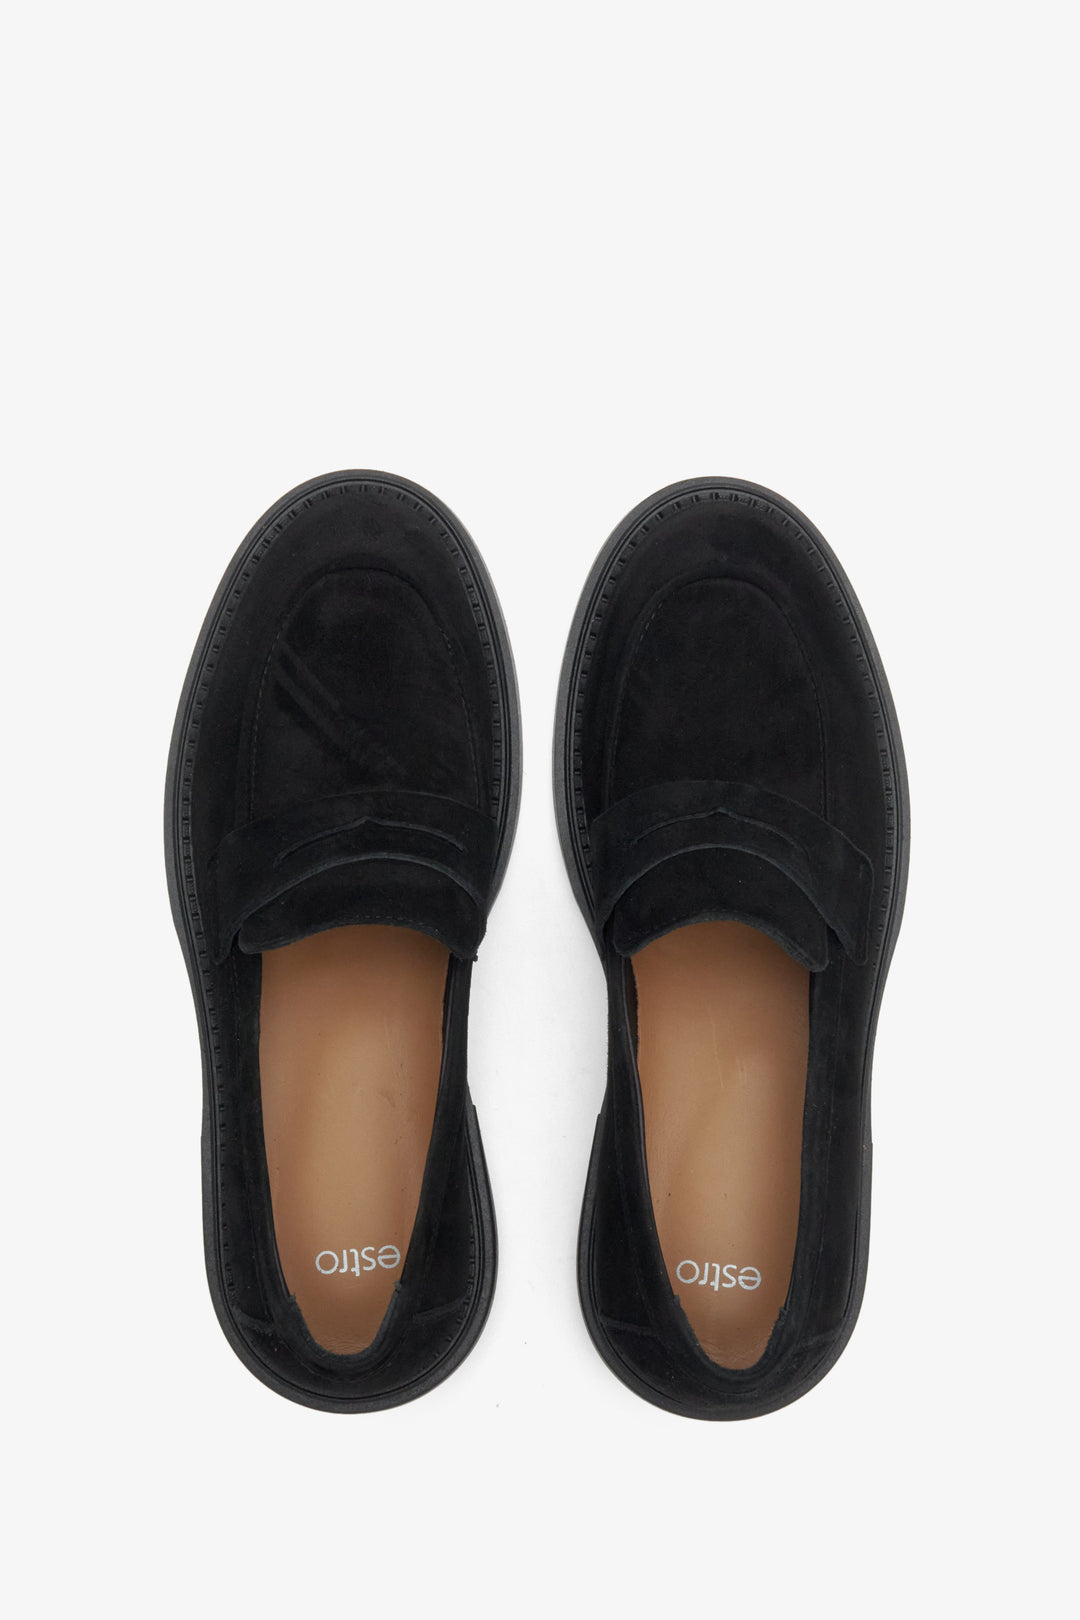 Black suede loafers for women Estro - presentation of the model from above.